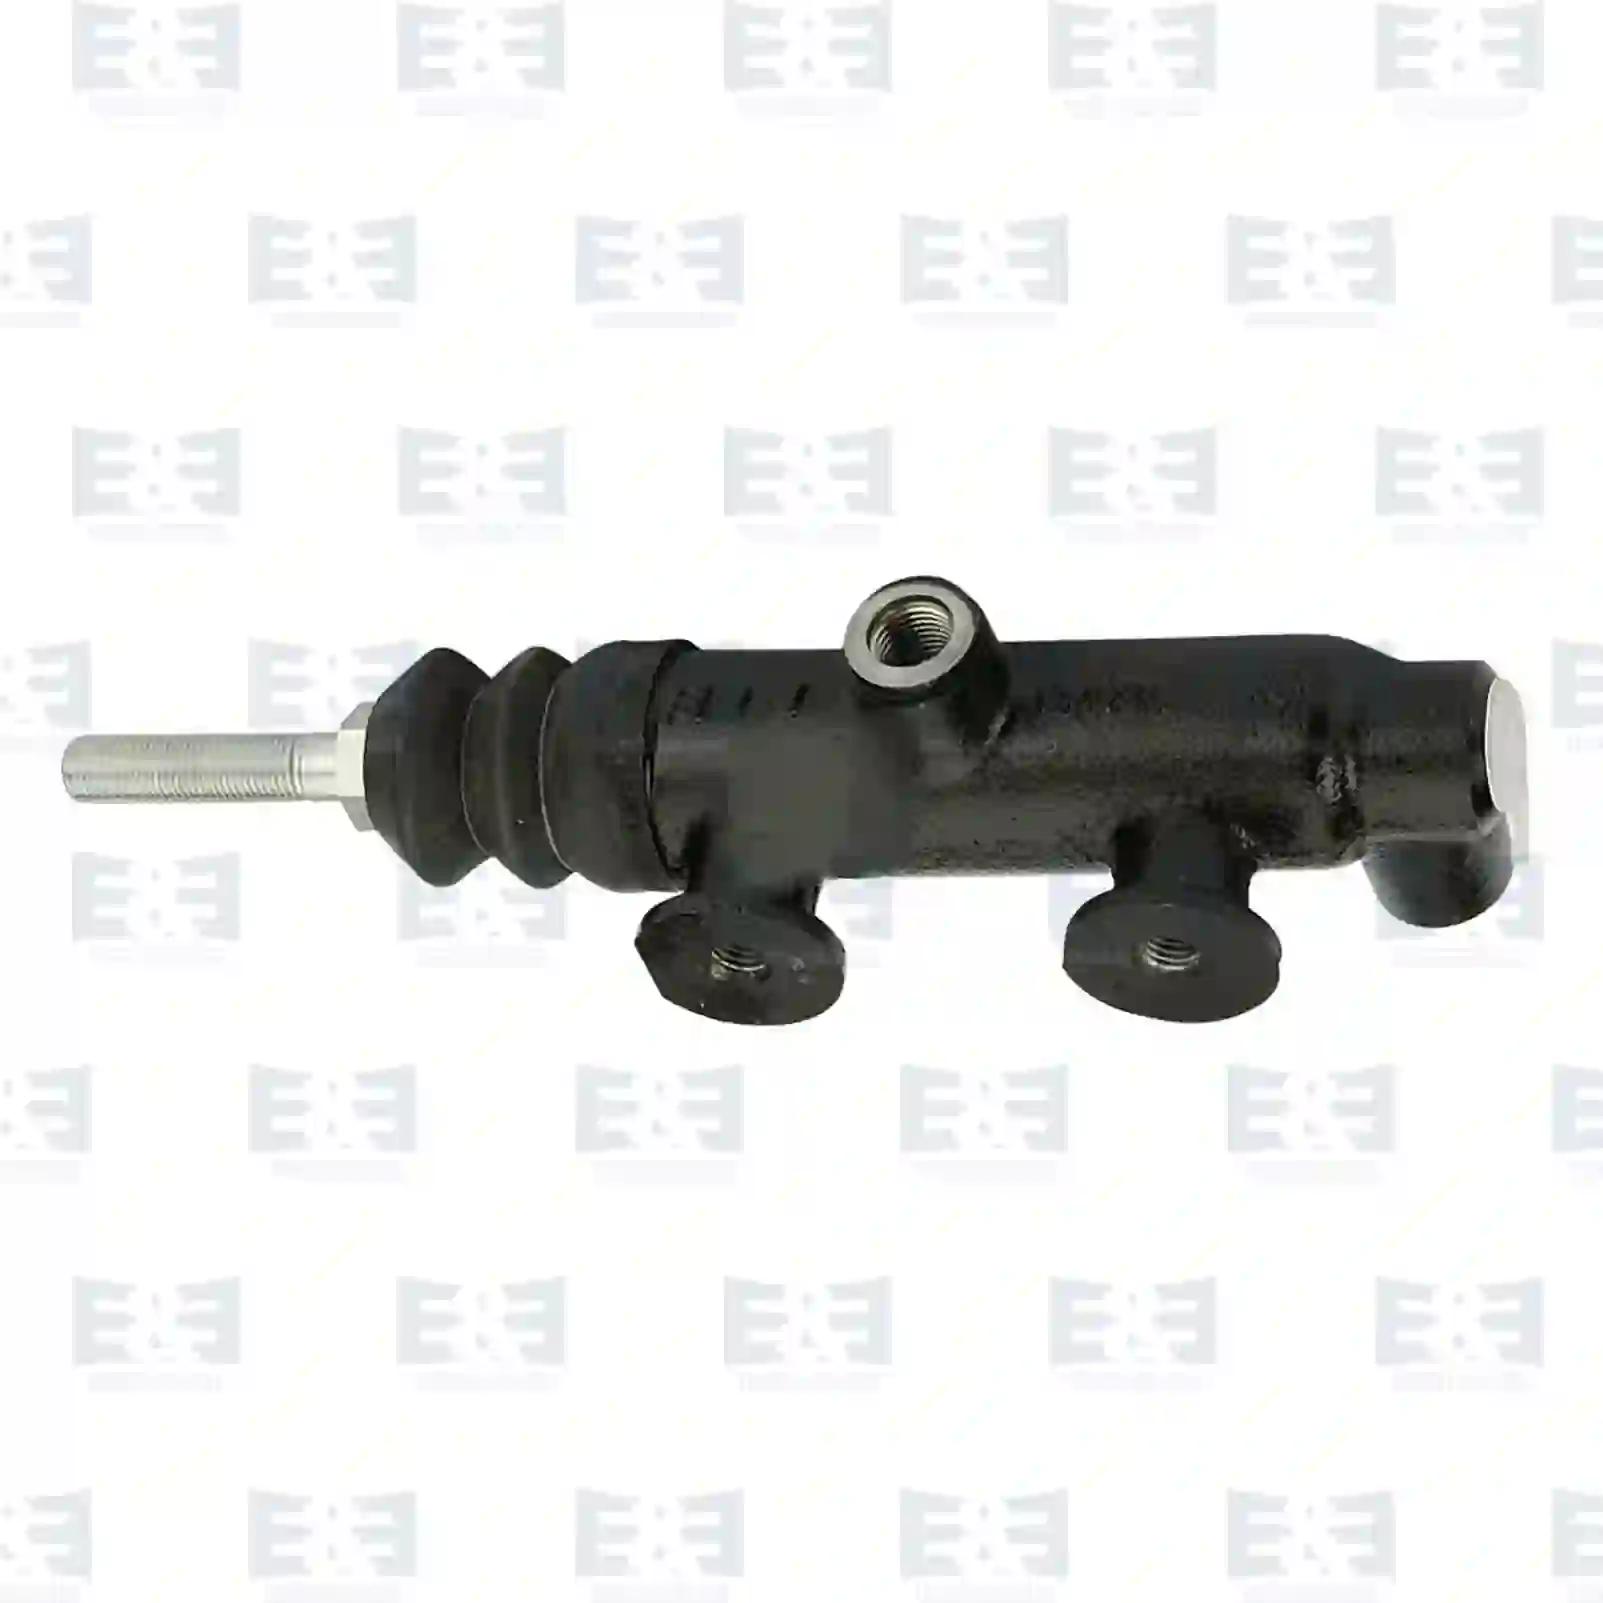 Clutch Cylinder Clutch cylinder, EE No 2E2288990 ,  oem no:0260242, 0390487, 0751820, 260242, 390487, 532259, 751820, ZG30278-0008 E&E Truck Spare Parts | Truck Spare Parts, Auotomotive Spare Parts